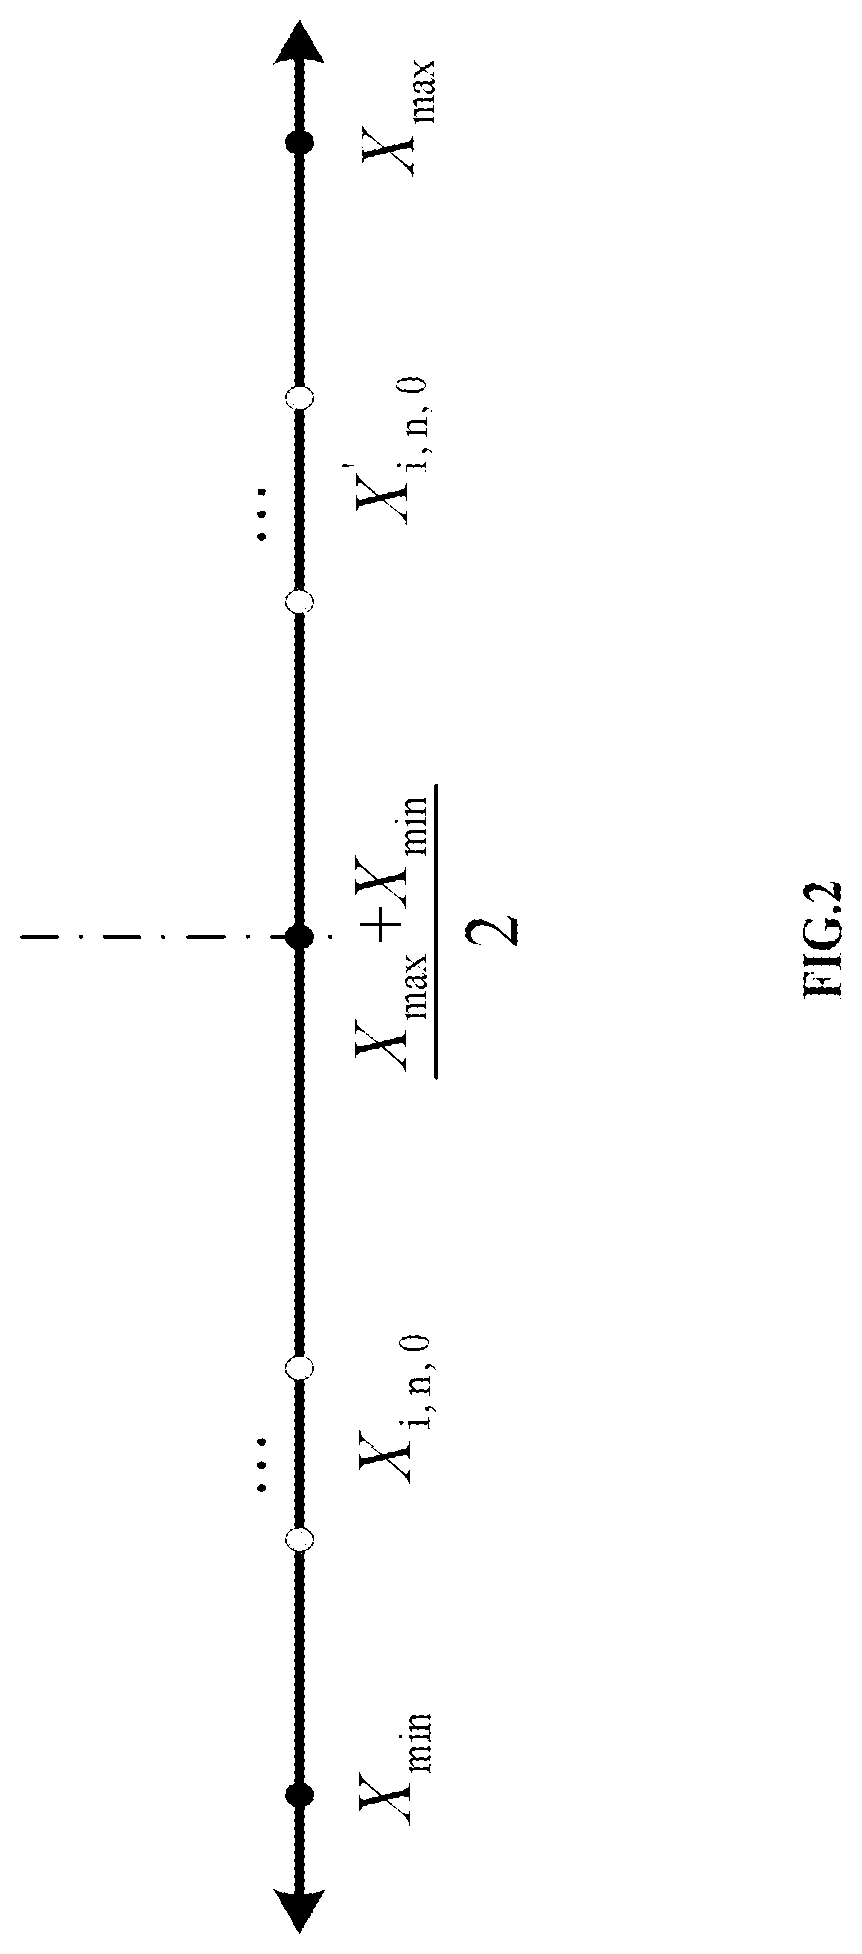 Method and system for multi-objective optimization of urban train operation